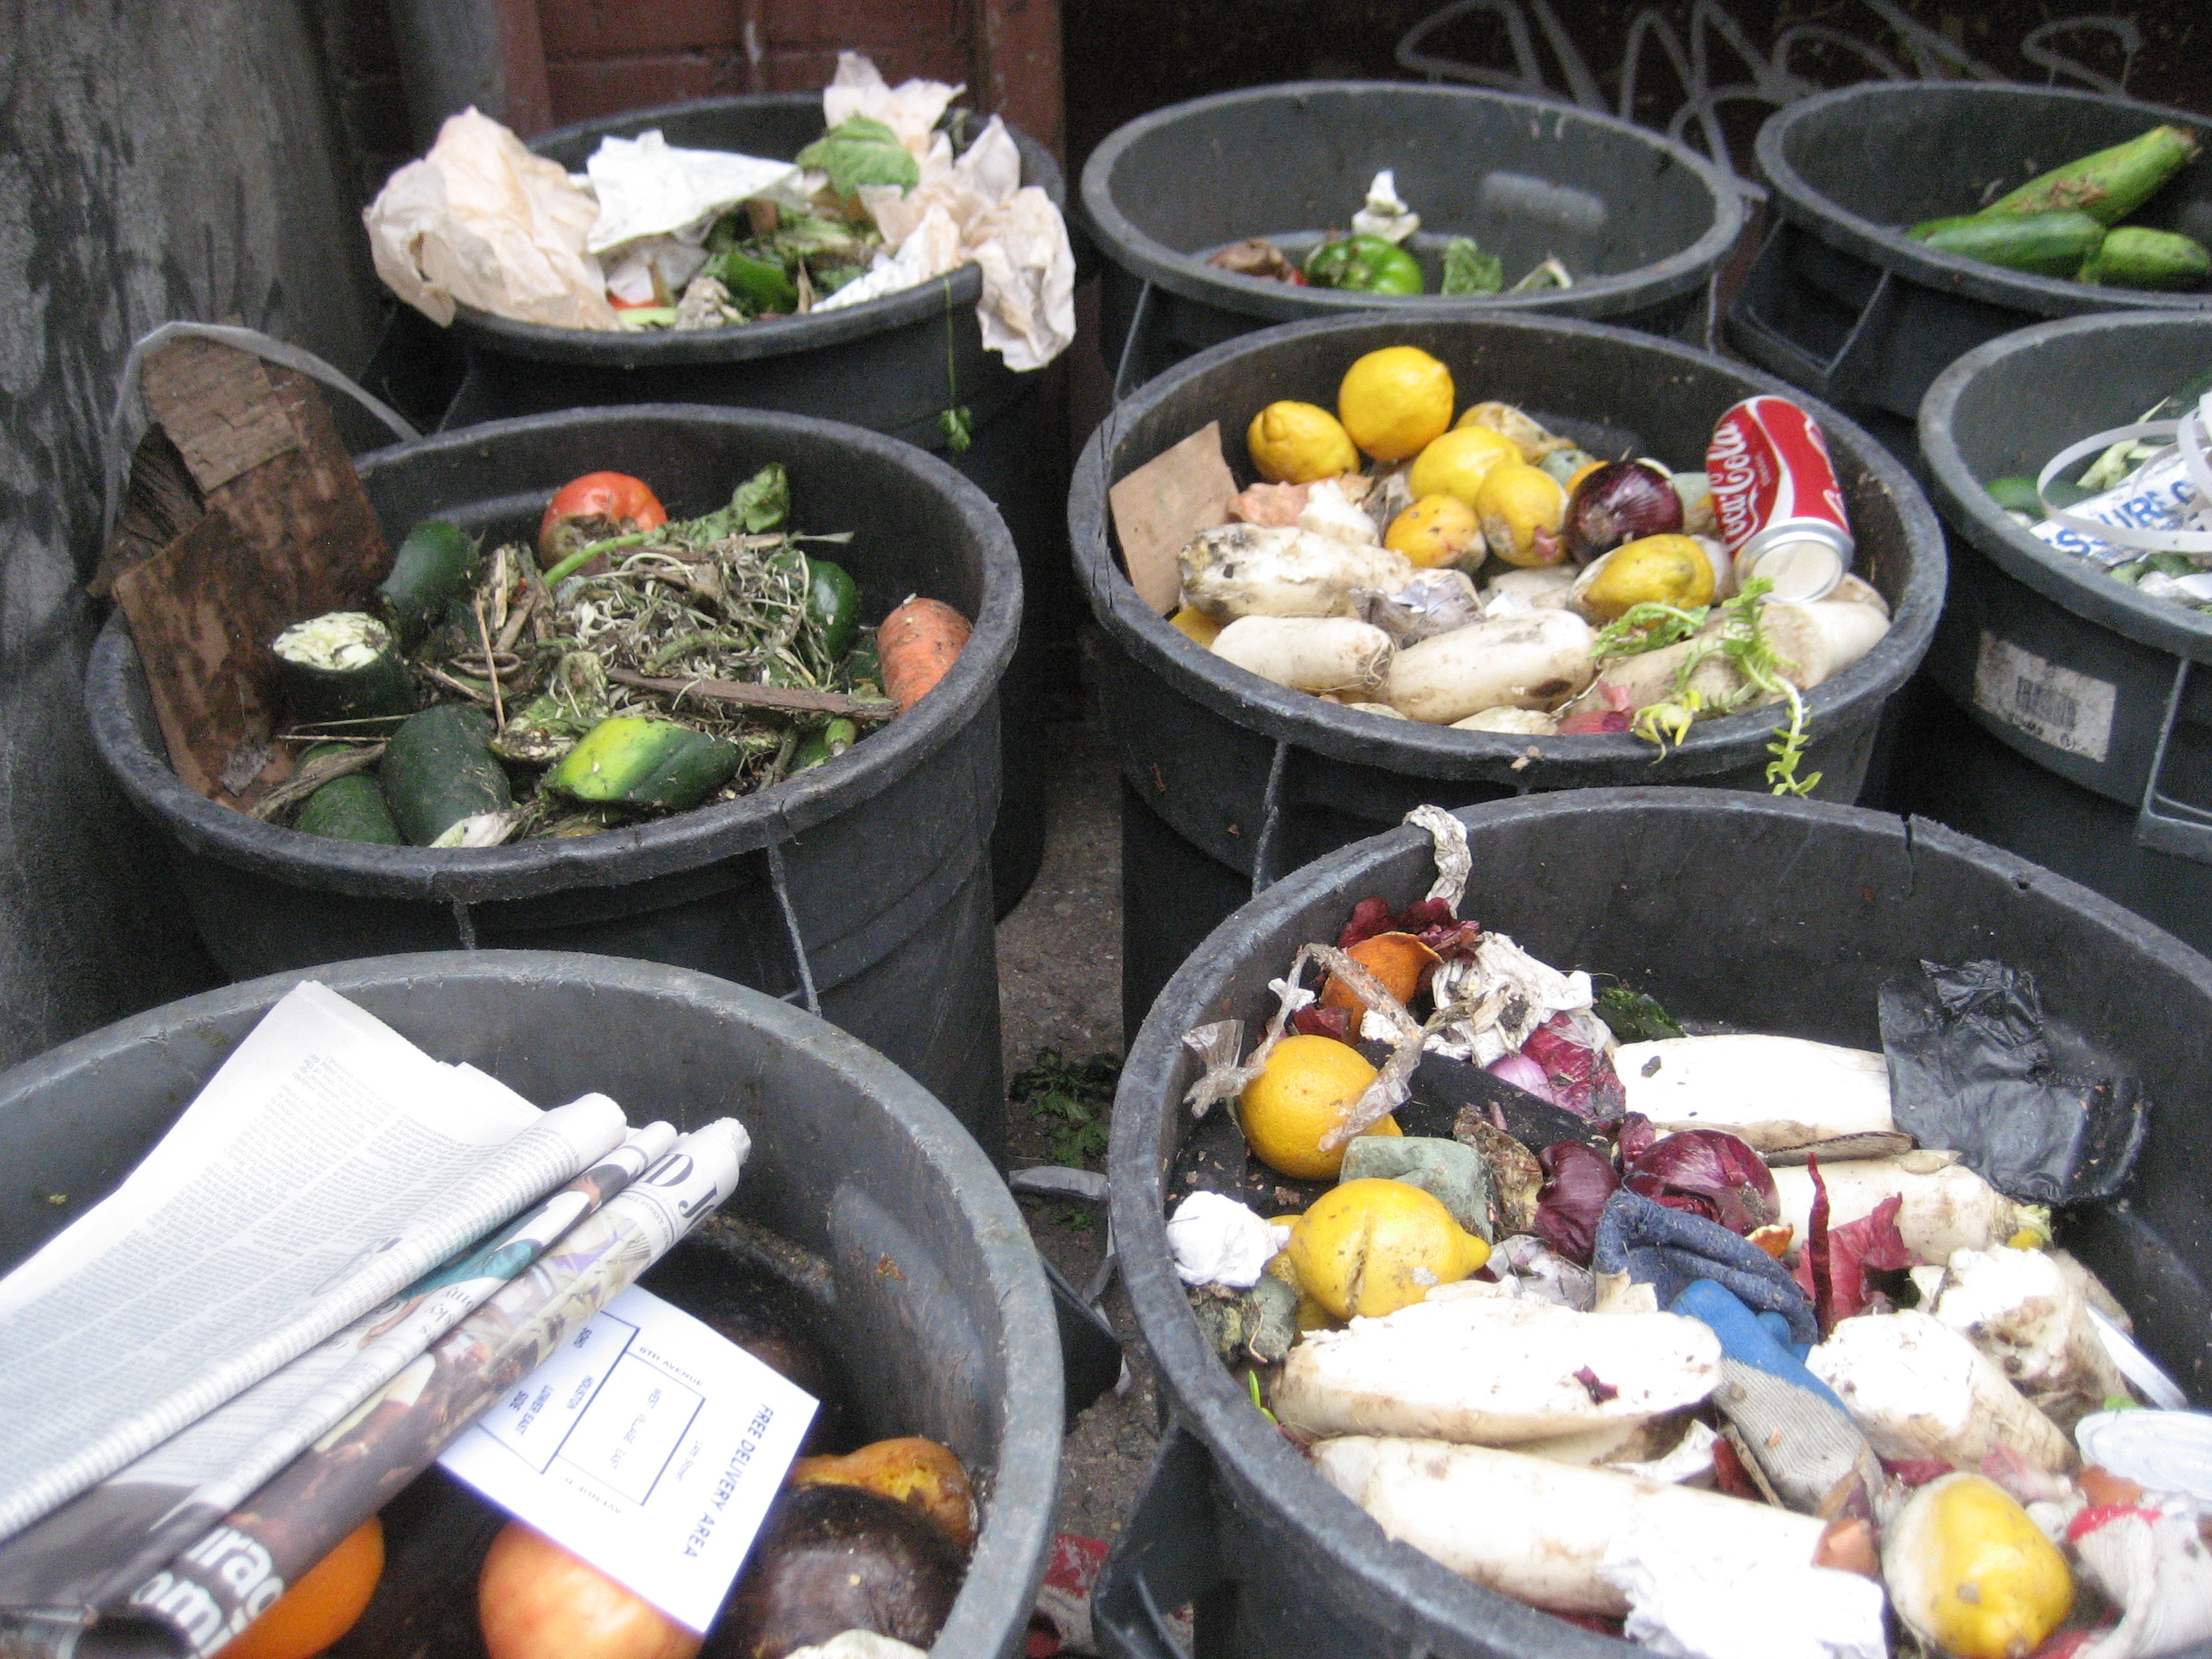 food waste management in india research paper